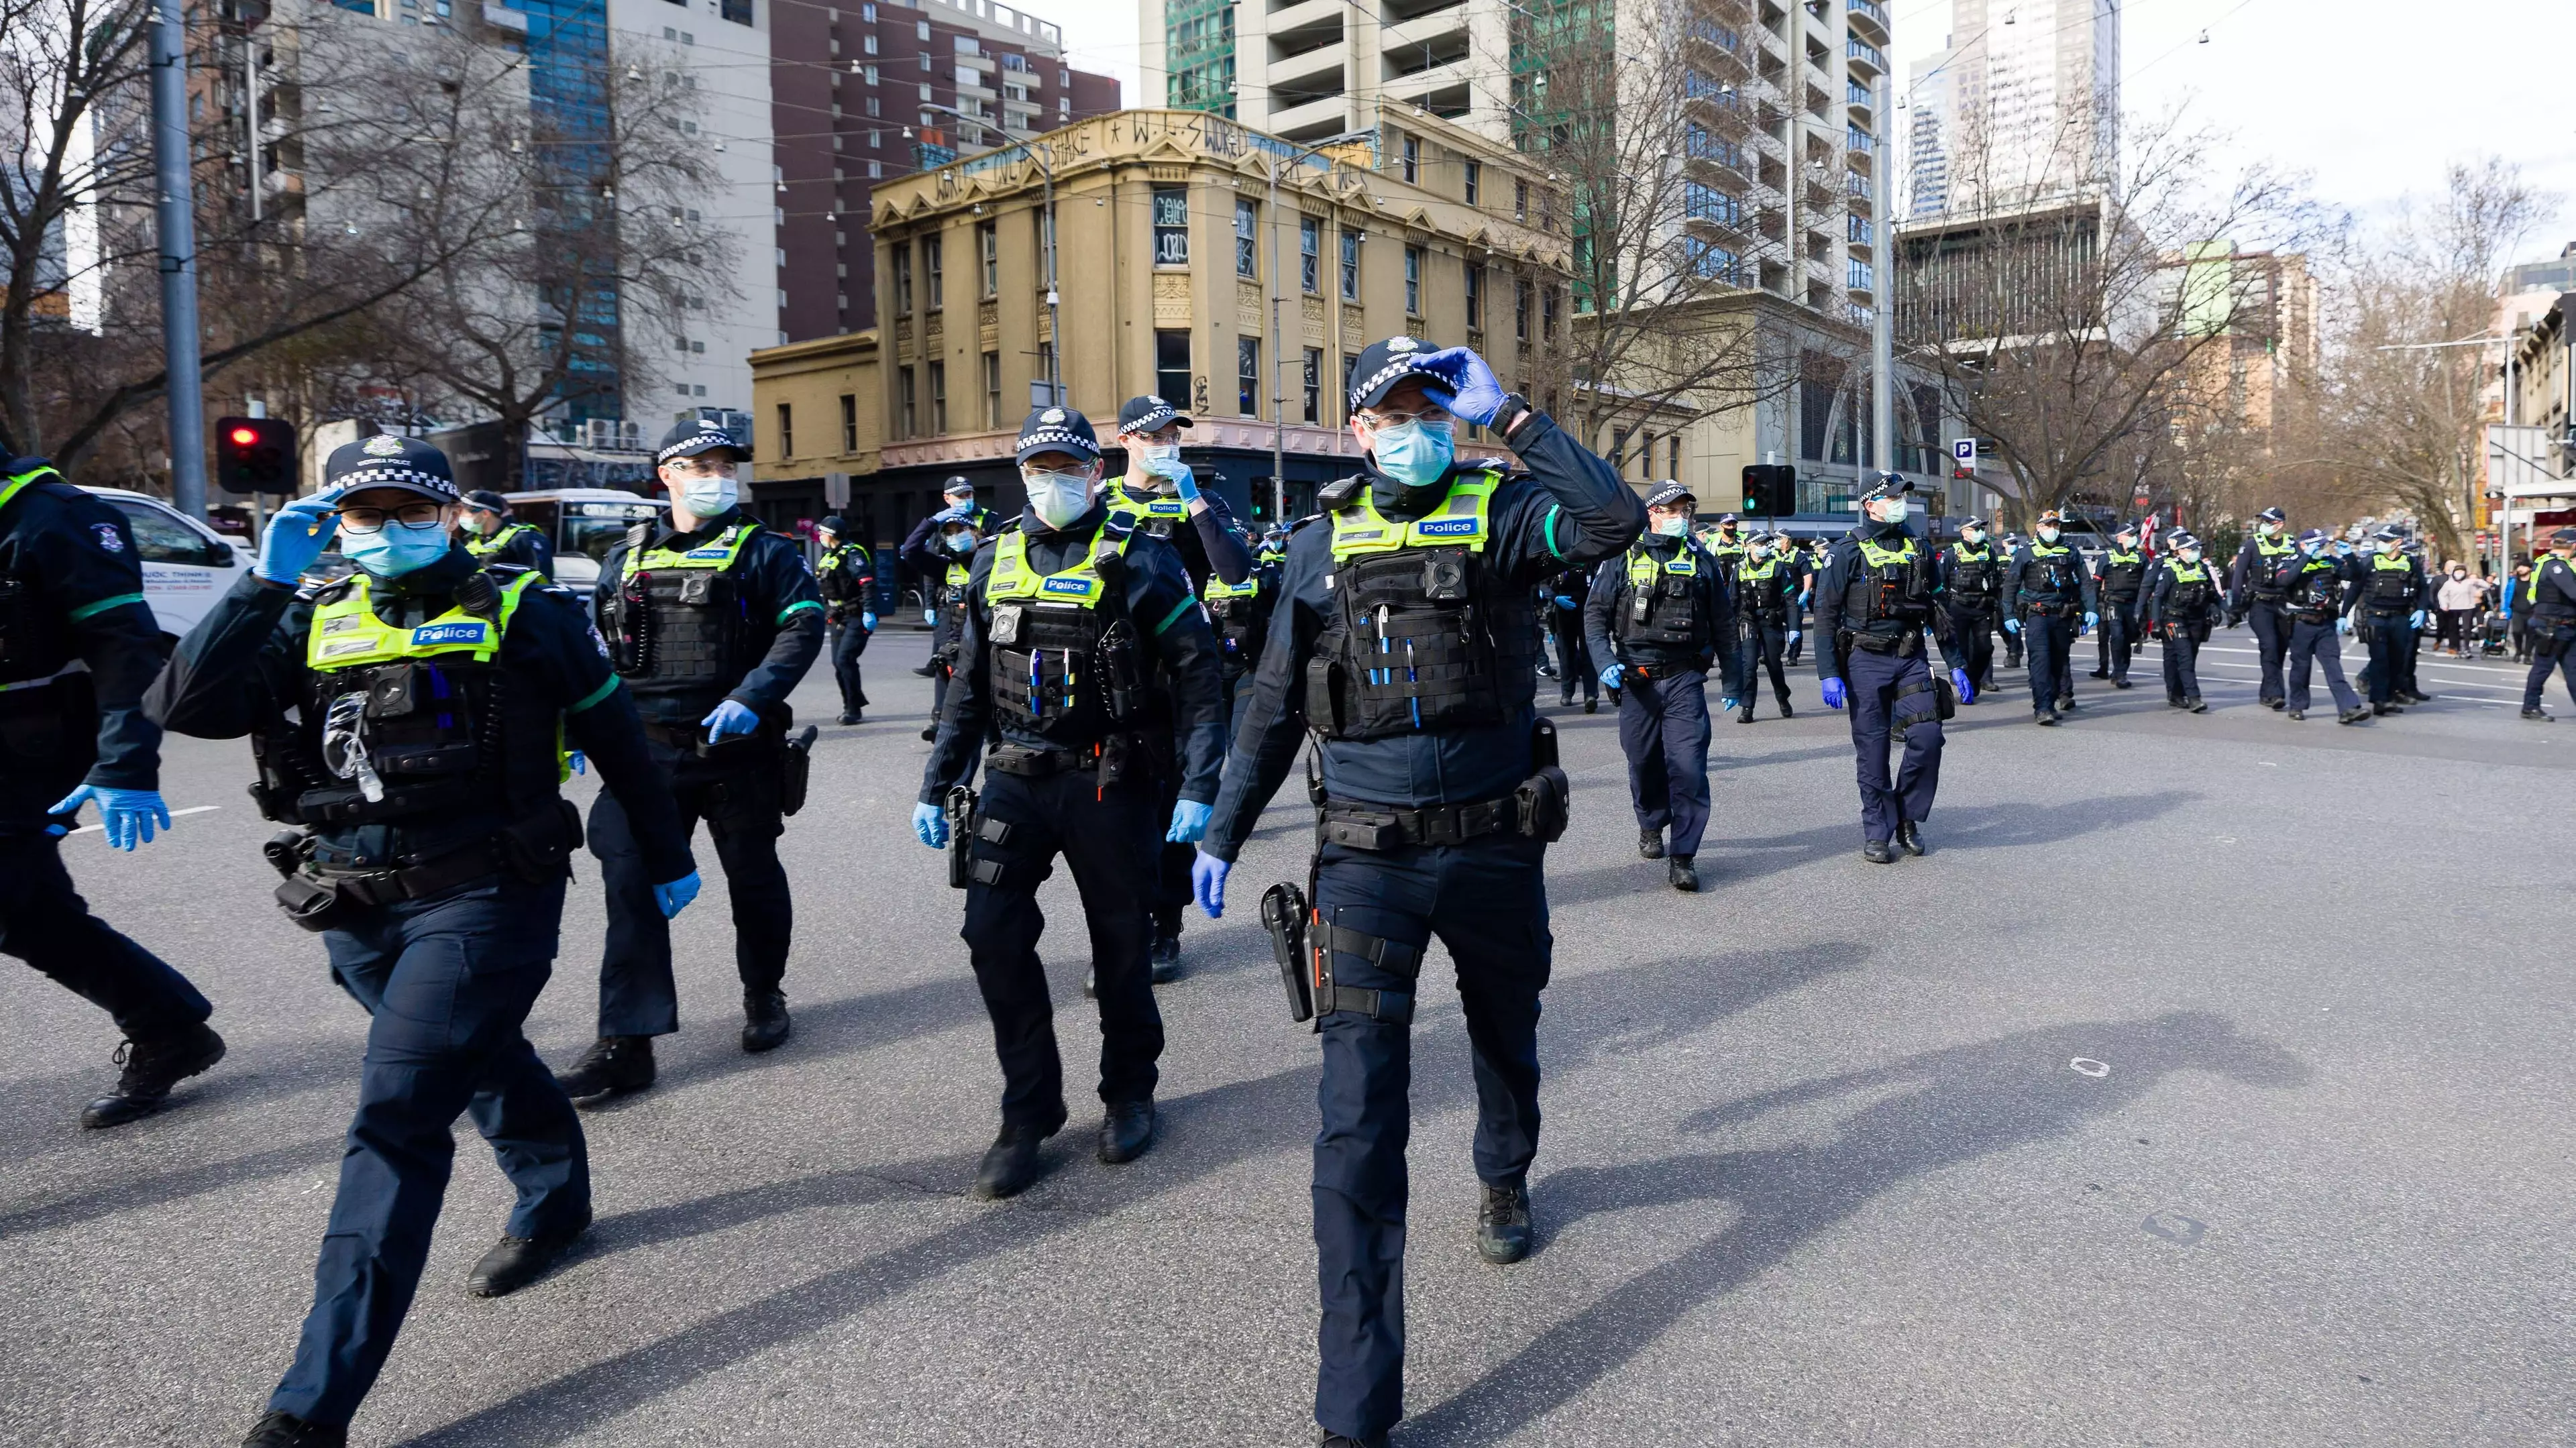 NSW Police Issue Ominous Warning For Anyone Planning Future Anti-Lockdown Protests